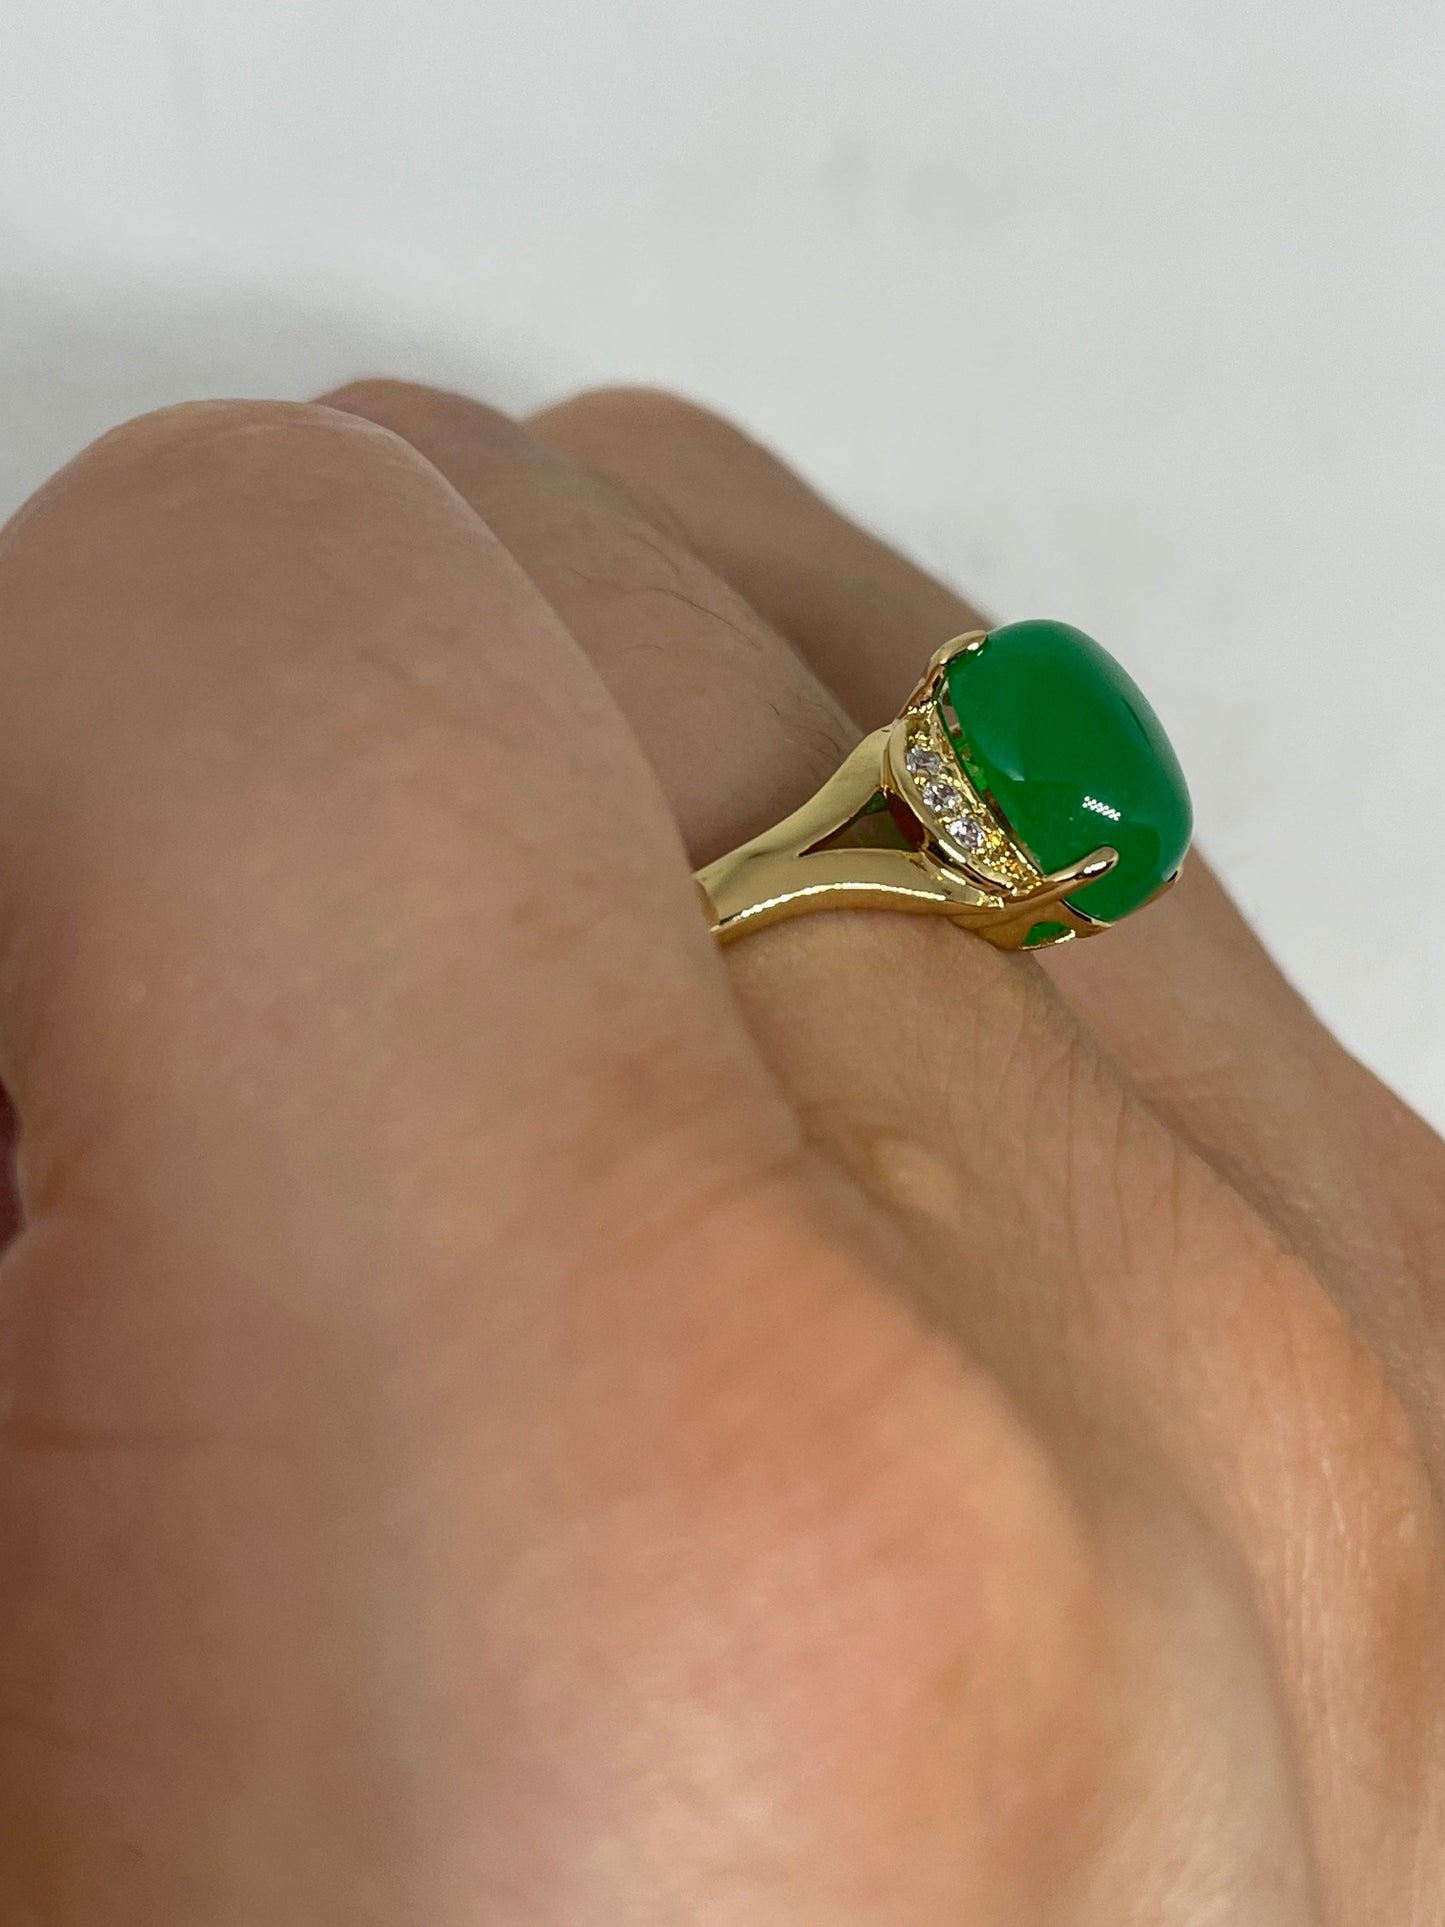 Vintage Lucky Green Nephrite Jade Gold Filled Cocktail Ring